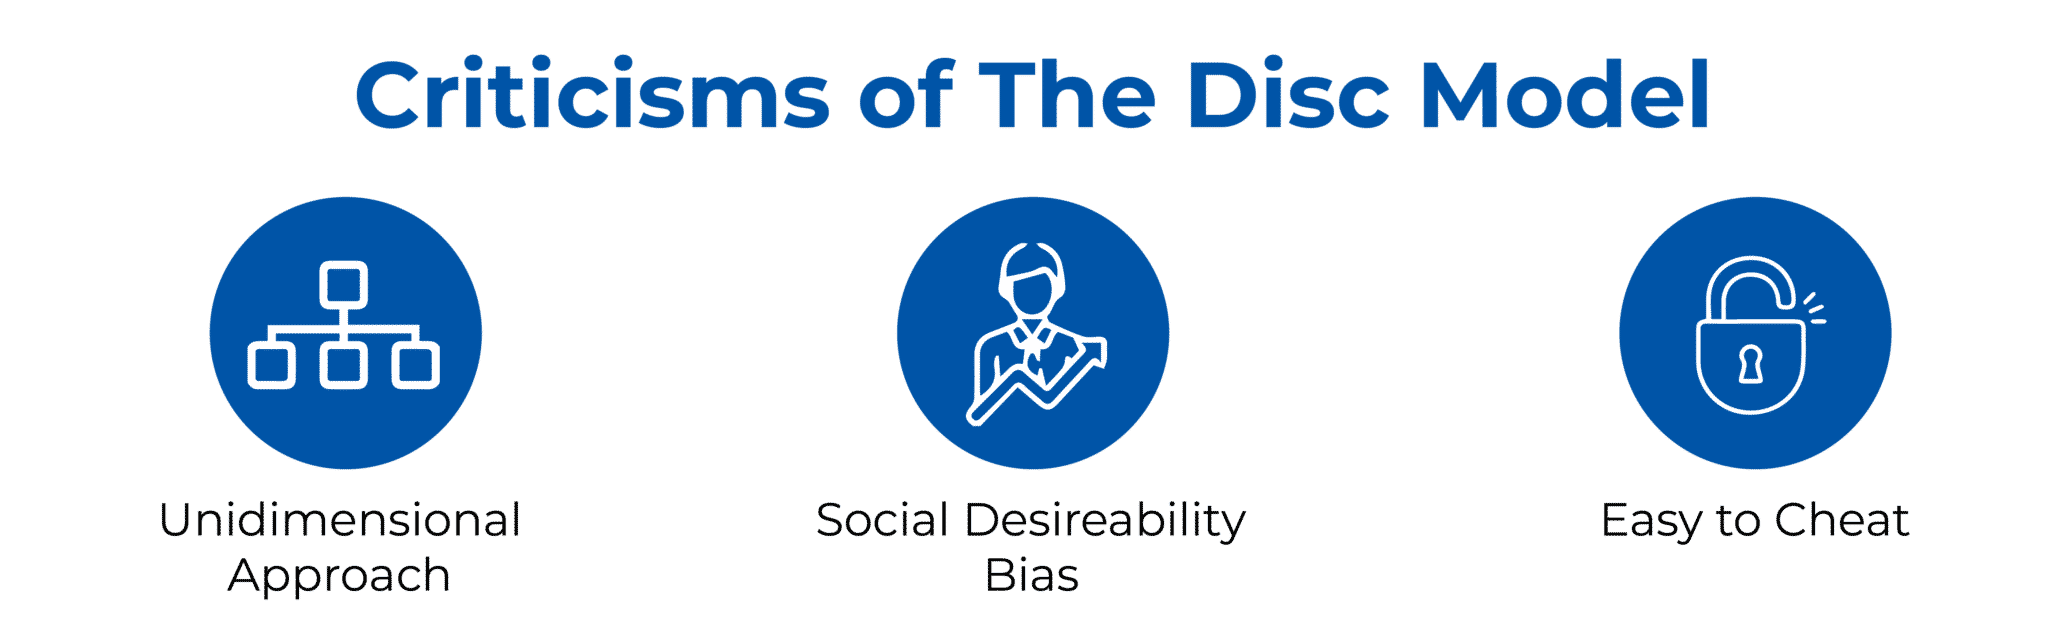 CRITICISMS OF THE DISC MODEL